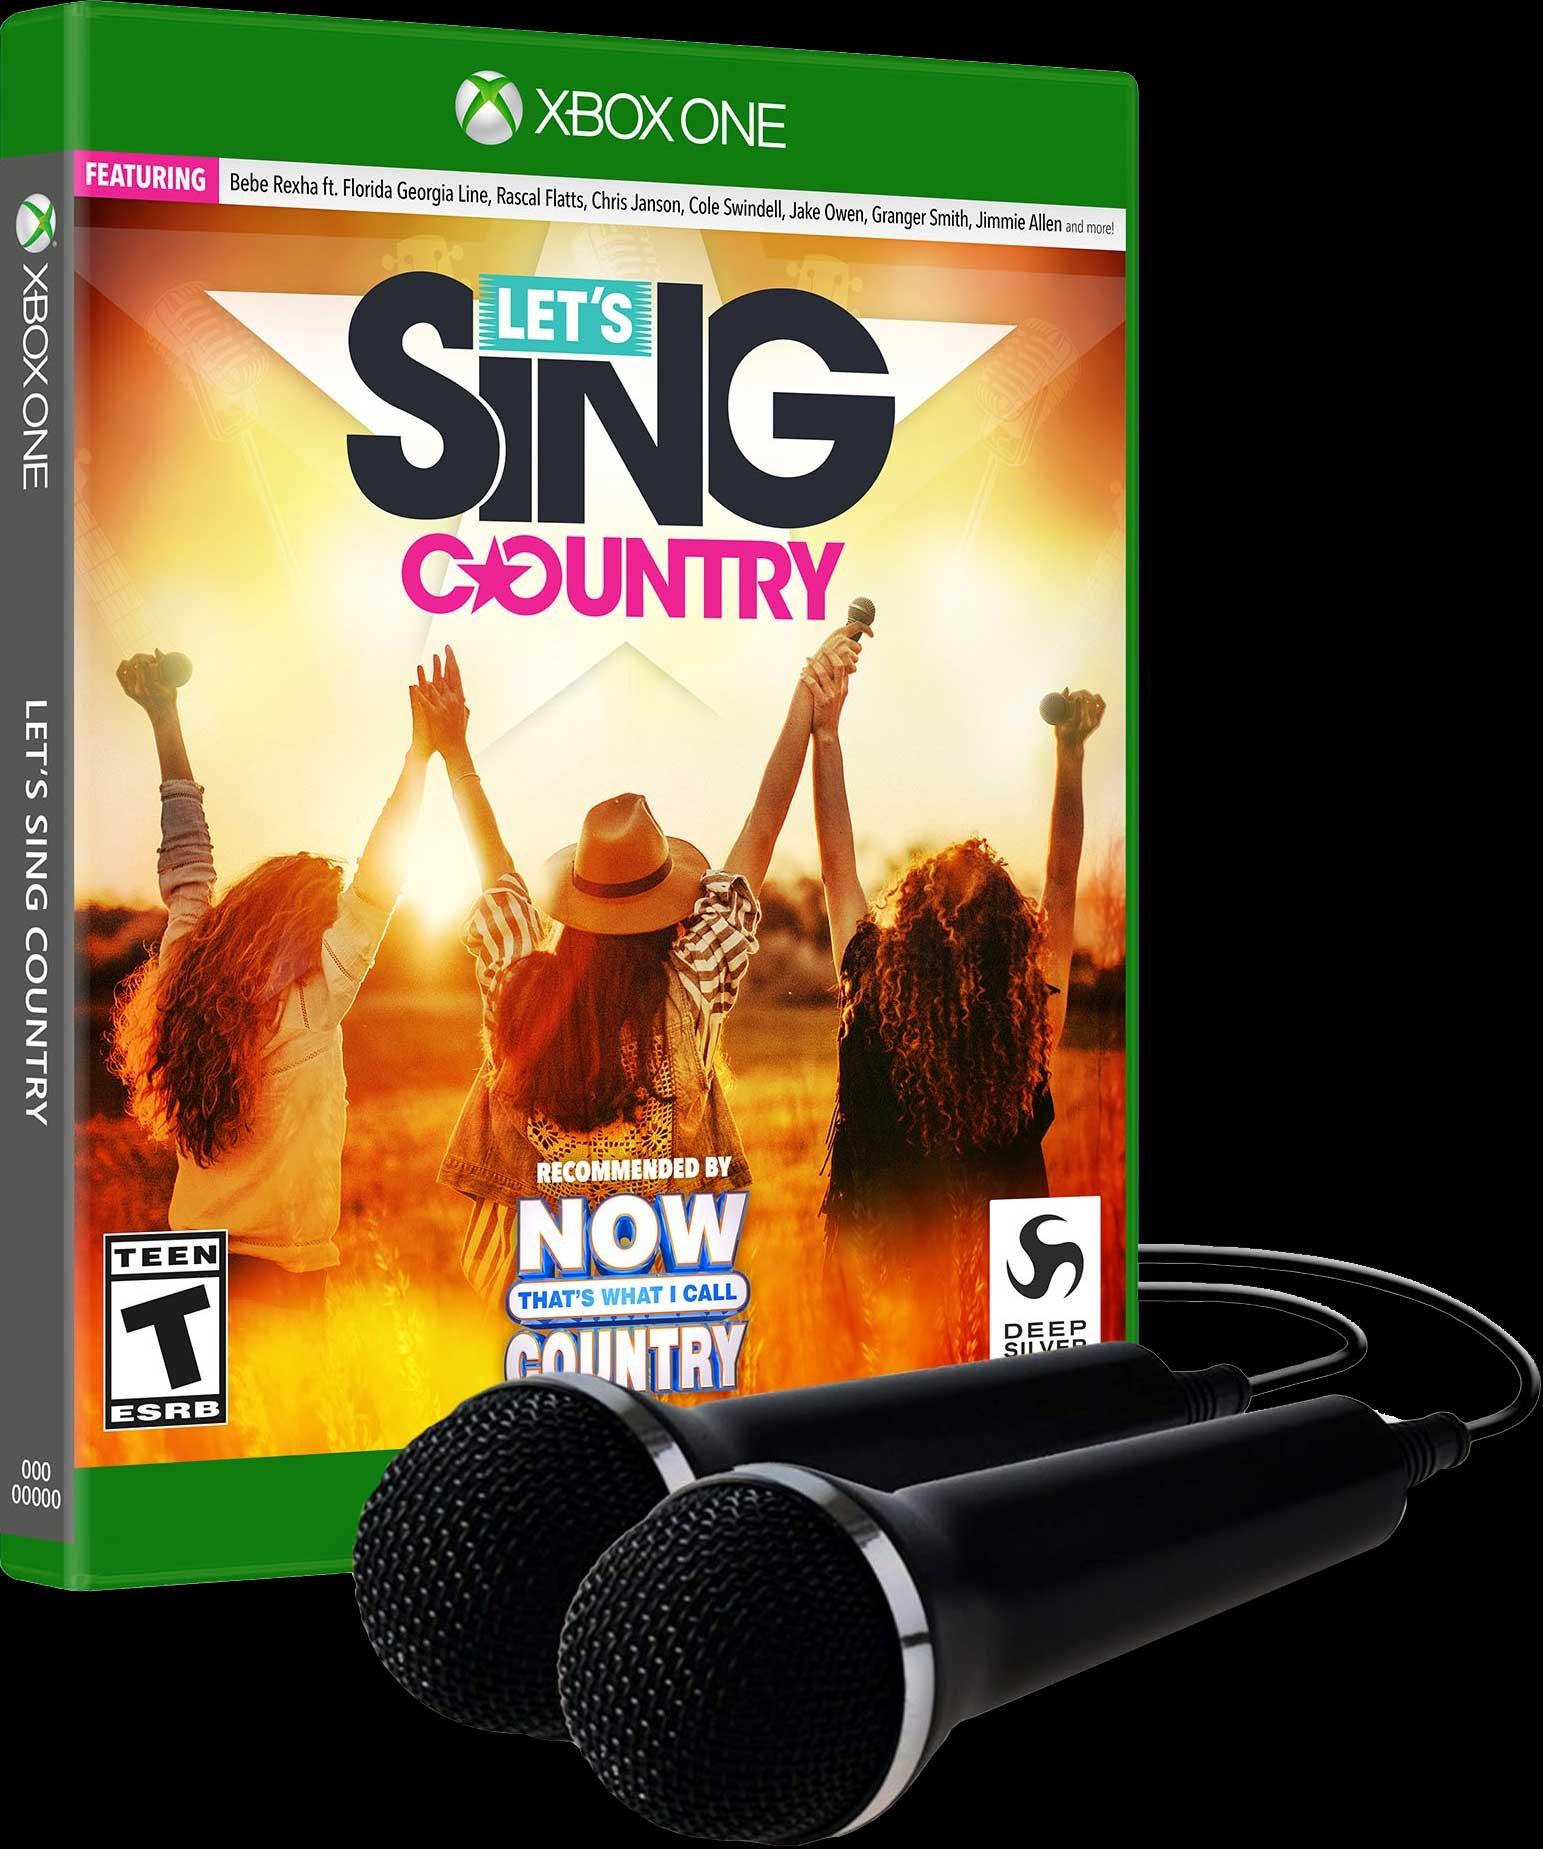 let's sing microphone xbox one